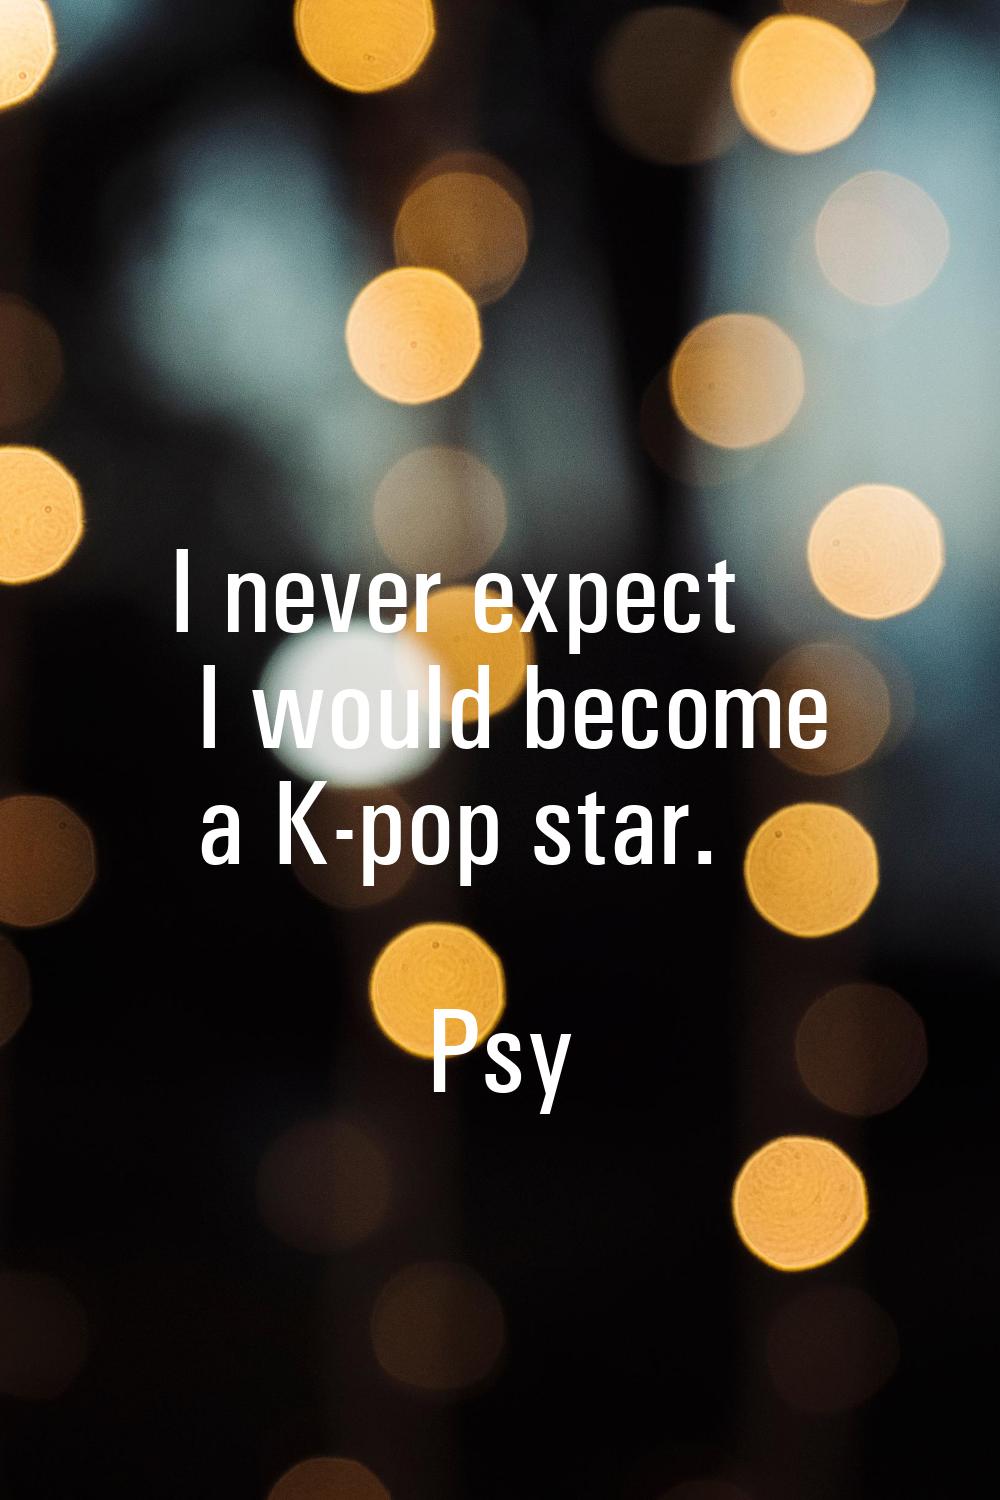 I never expect I would become a K-pop star.